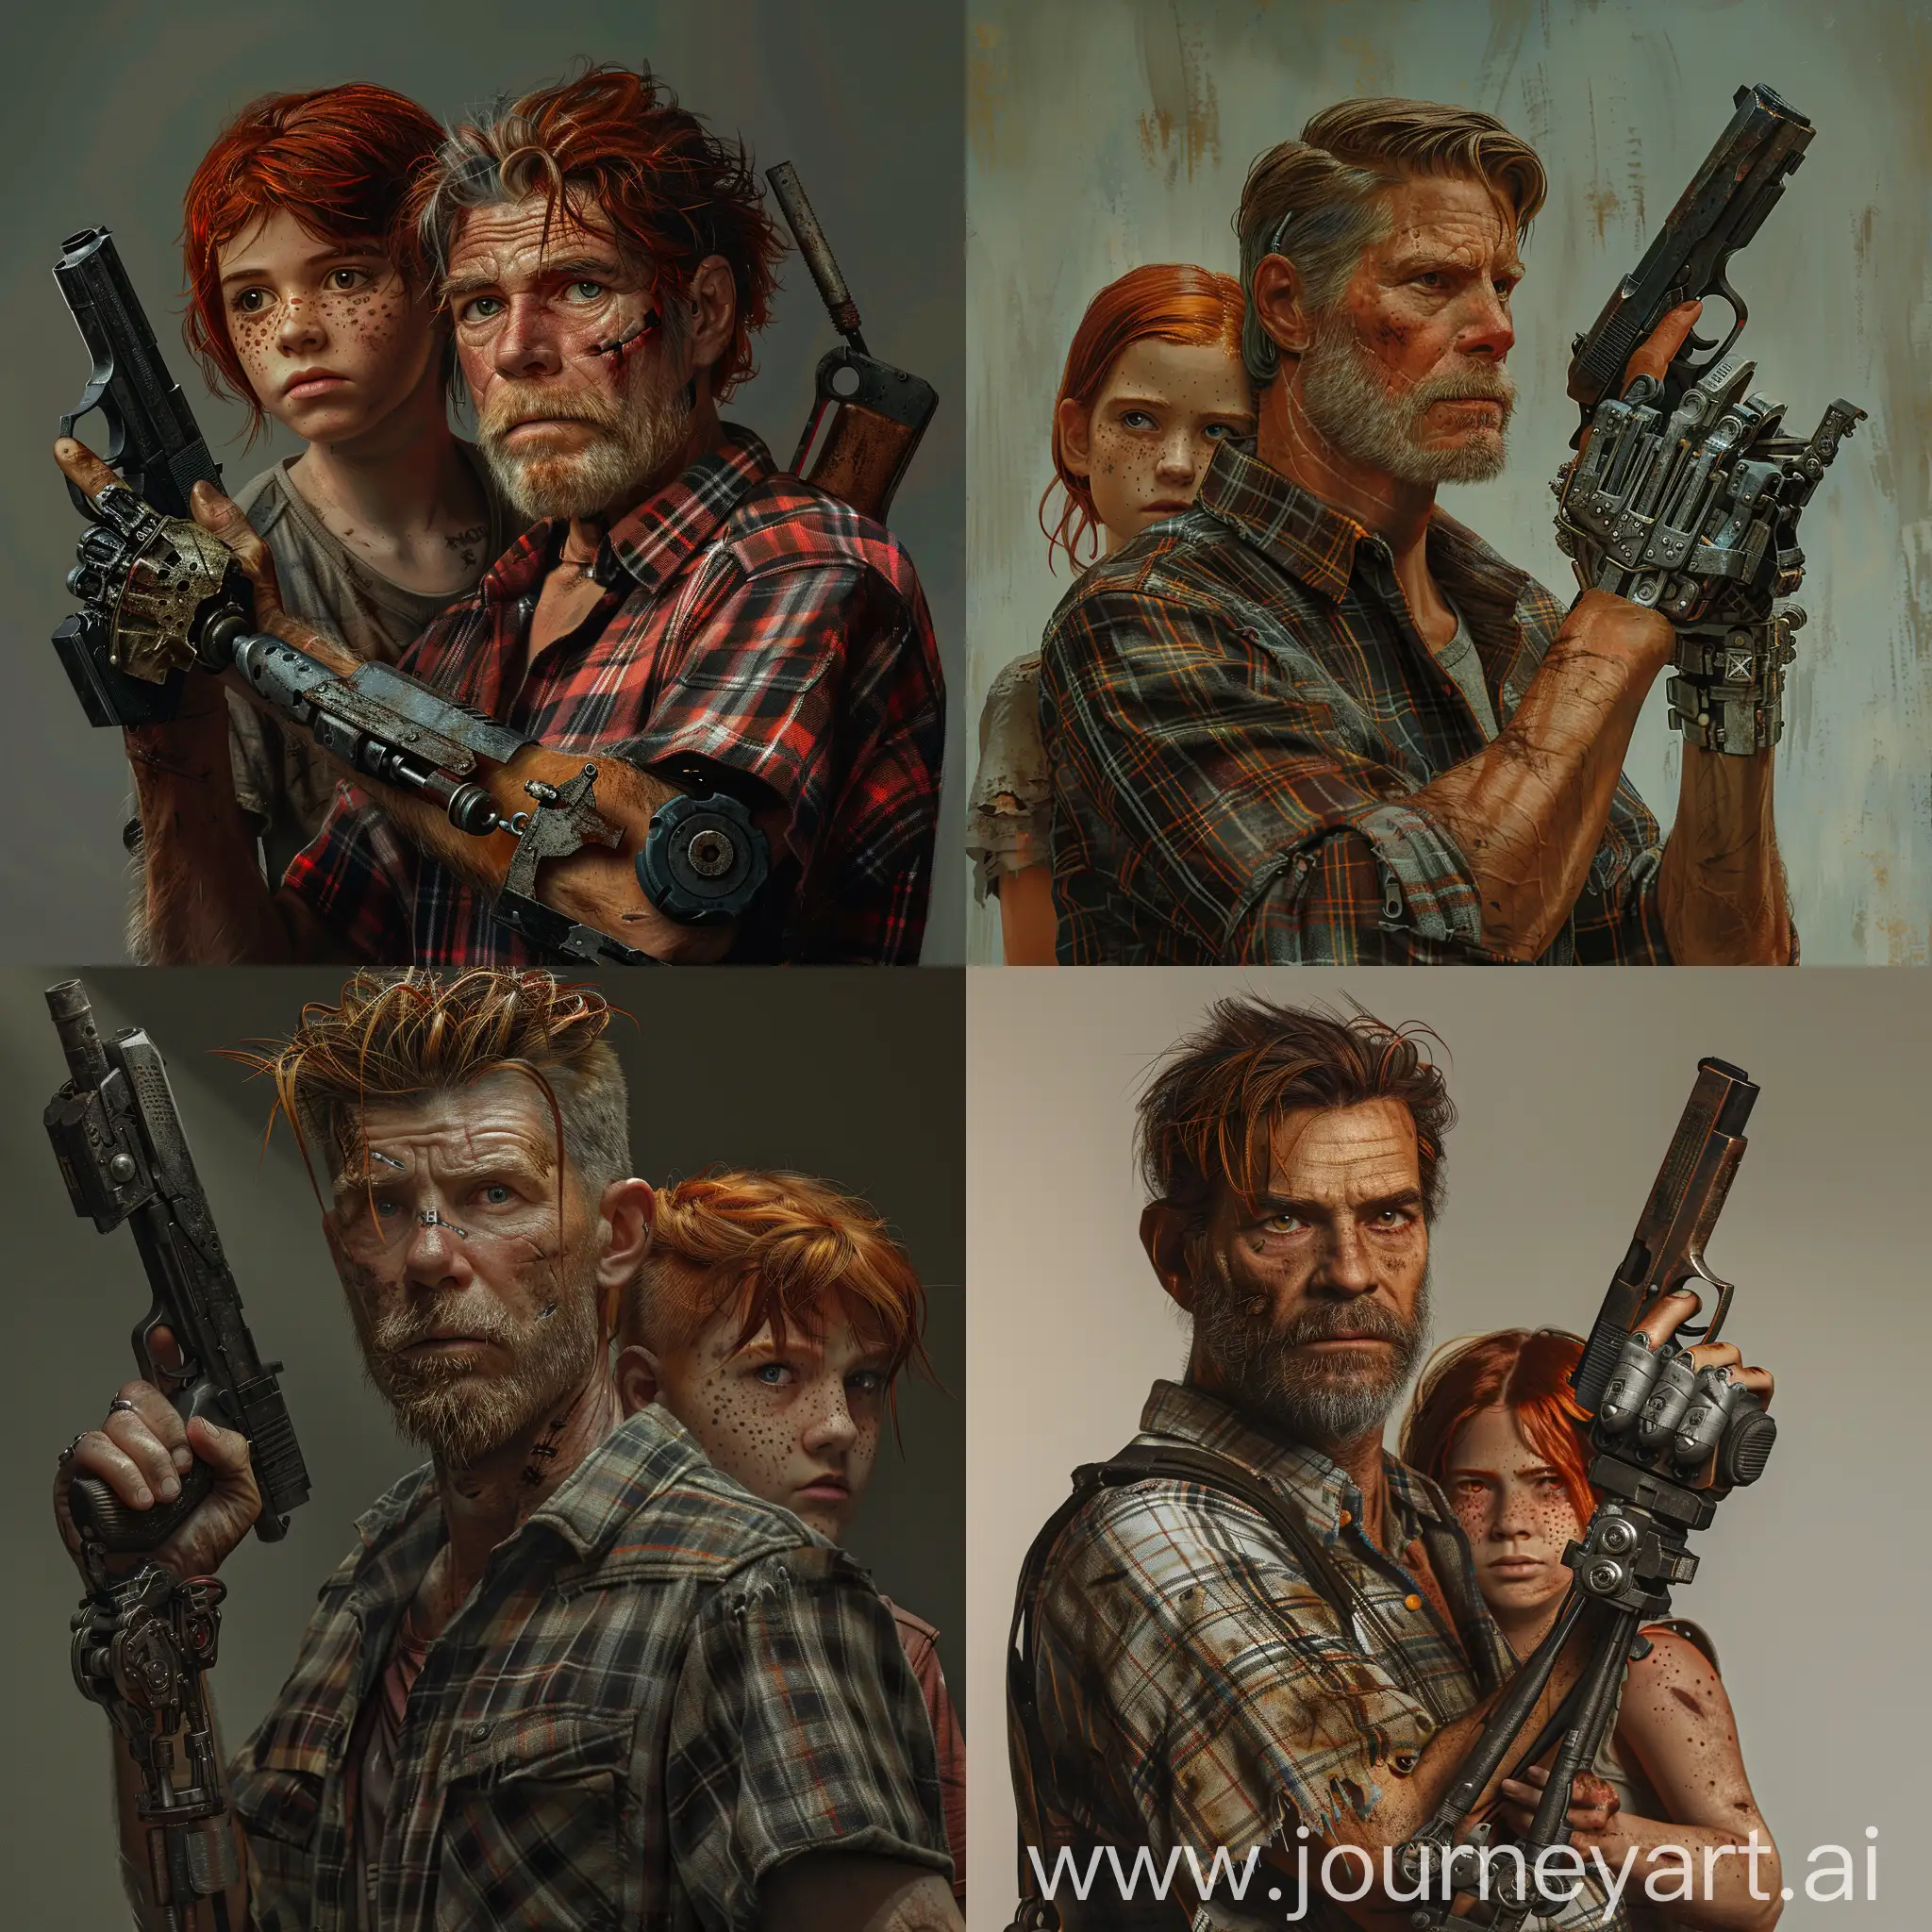 PostApocalyptic-Siblings-Brother-with-Prosthetic-Hand-and-Pistol-Protects-RedHaired-Sister